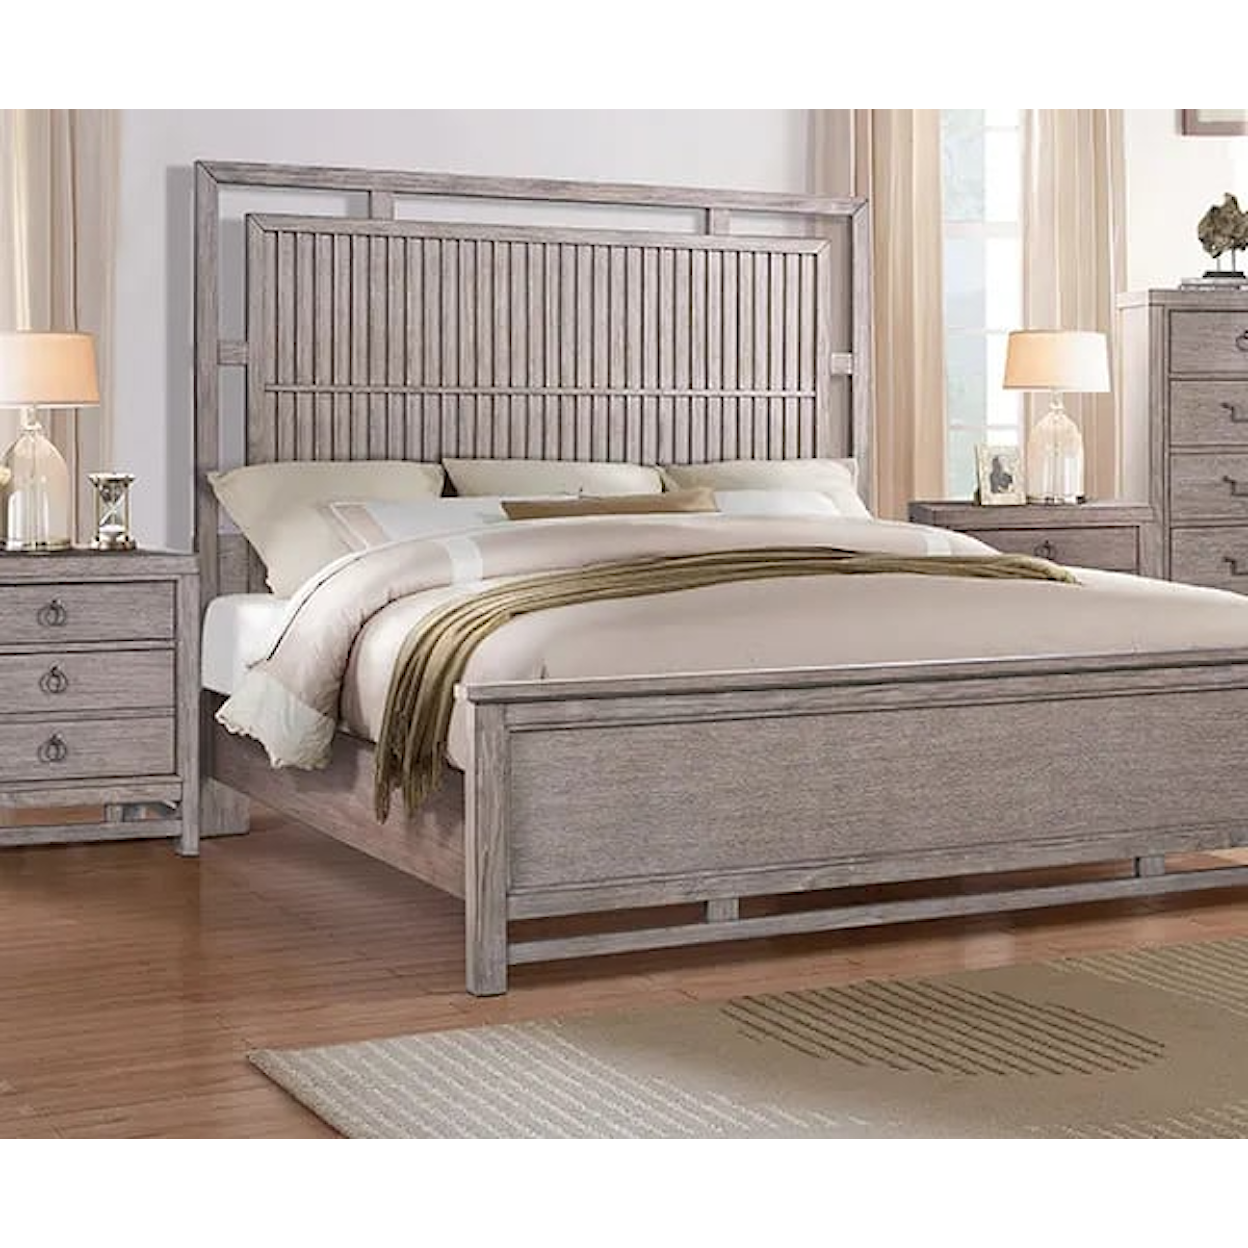 Legends Furniture Fusion King Fusion Bed